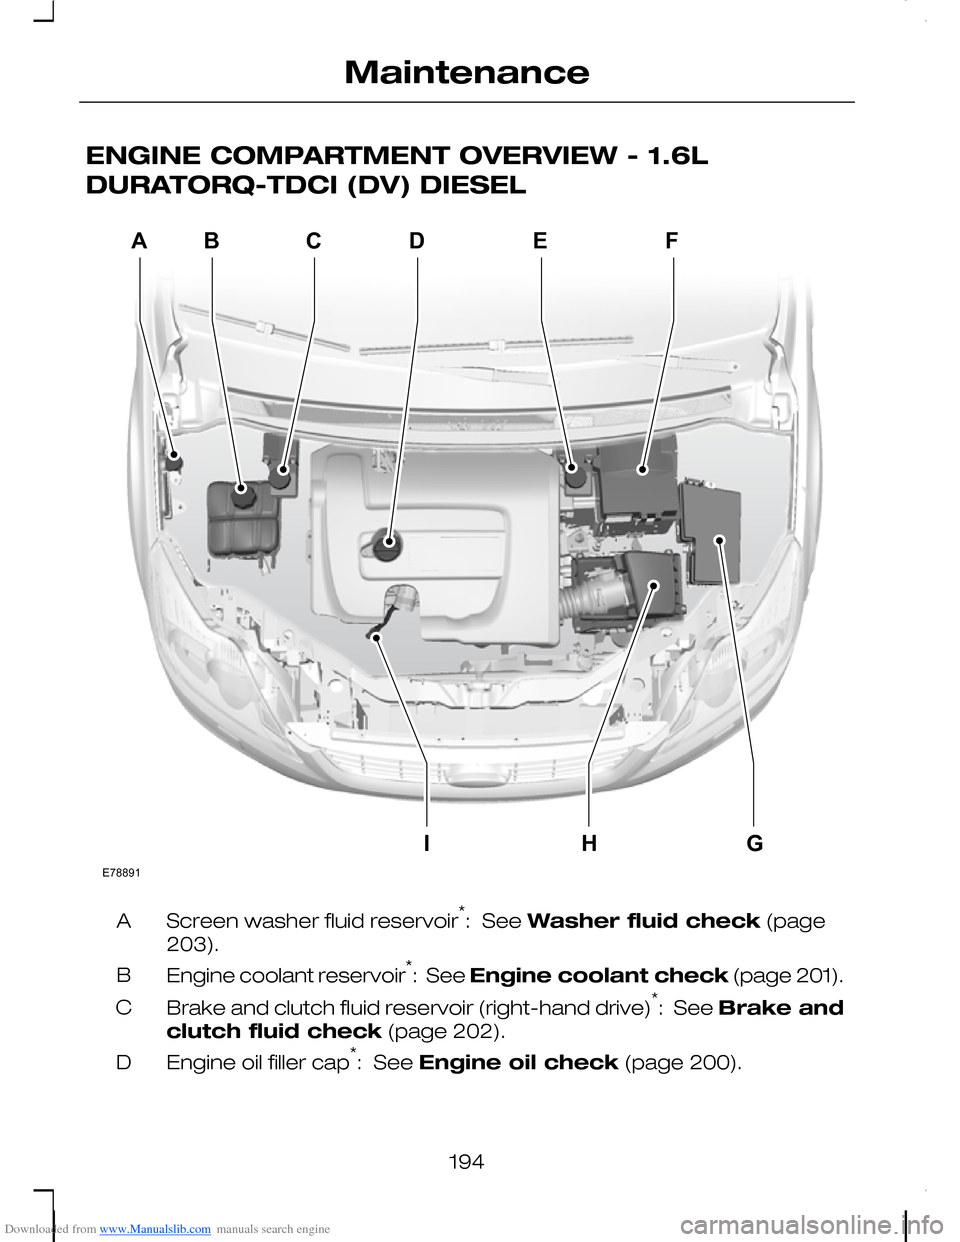 FORD C MAX 2008 1.G Owners Manual Downloaded from www.Manualslib.com manuals search engine ENGINE COMPARTMENT OVERVIEW - 1.6L
DURATORQ-TDCI (DV) DIESEL
Screen washer fluid reservoir*:  See Washer fluid check (page
203).
A
Engine coola